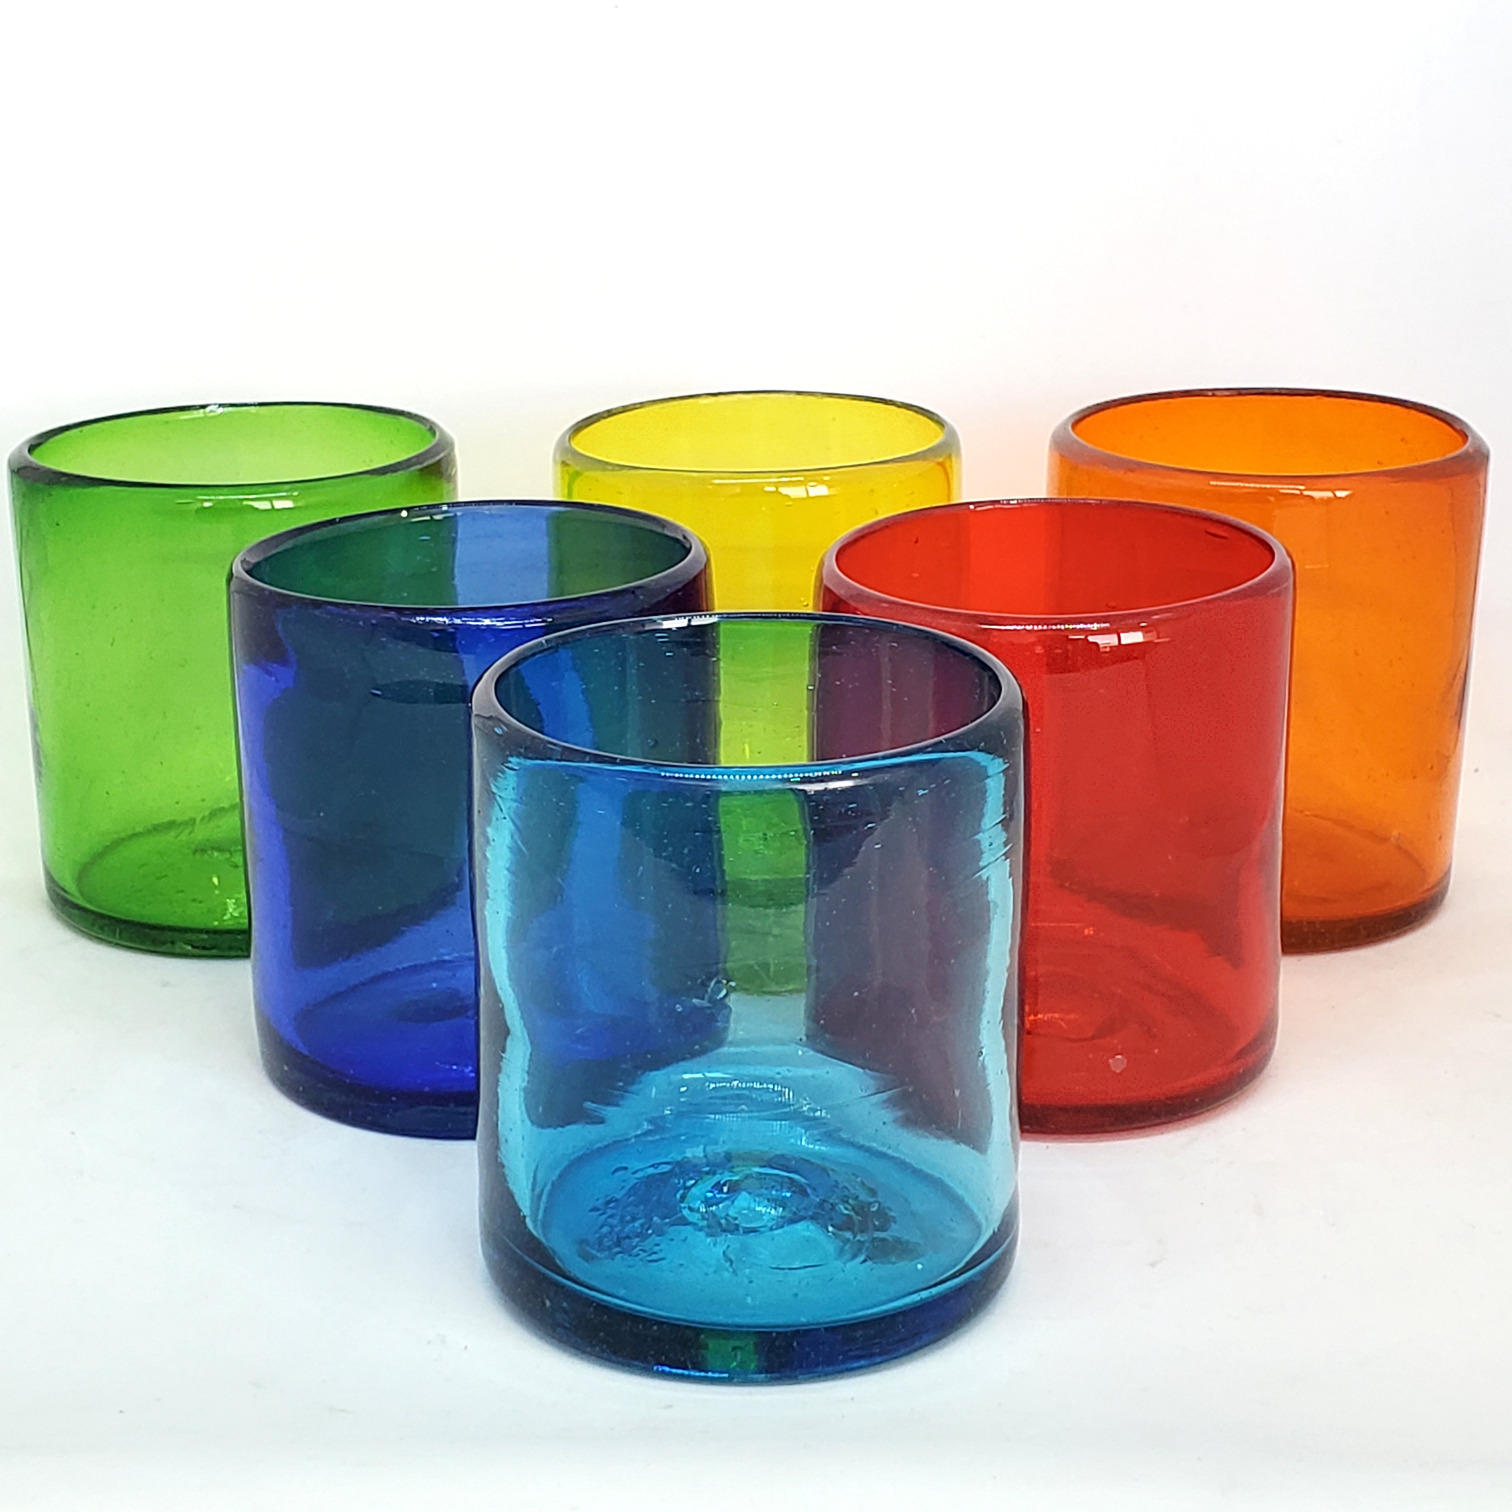 Sale Items / Rainbow Colored 9 oz Short Tumblers (set of 6) / Enhance your favorite drink with these colorful handcrafted glasses.